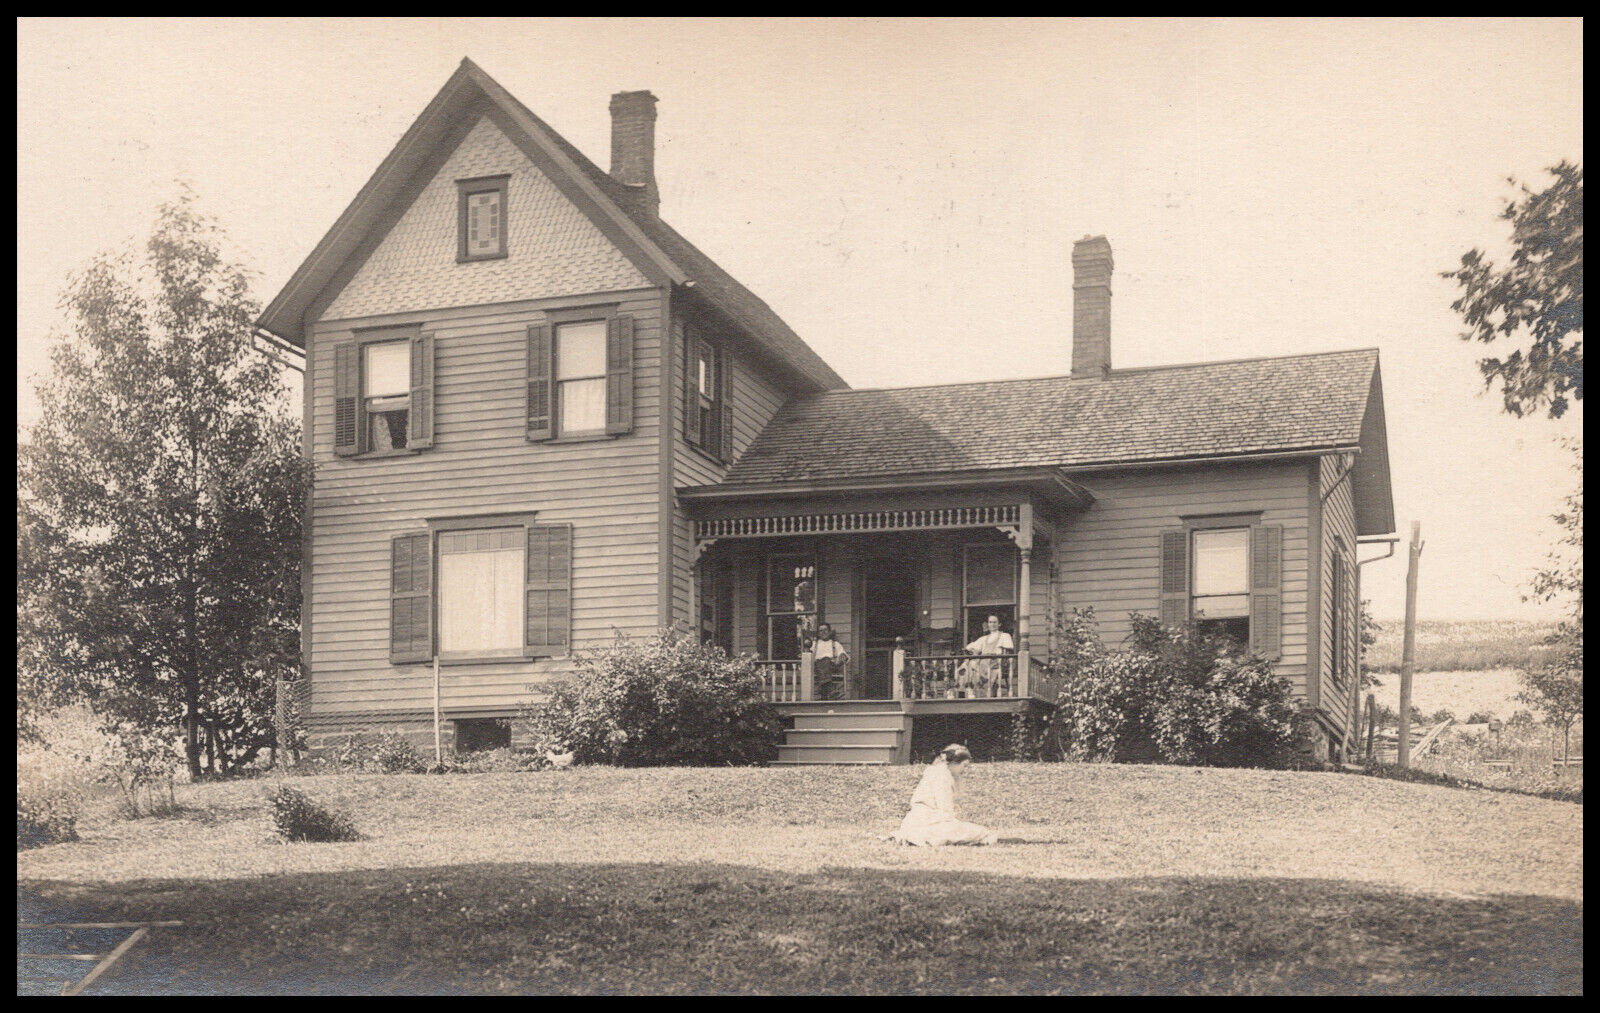 Sidney, New York, Family on Porch, Delaware County, Real Photo Postcard RPPC